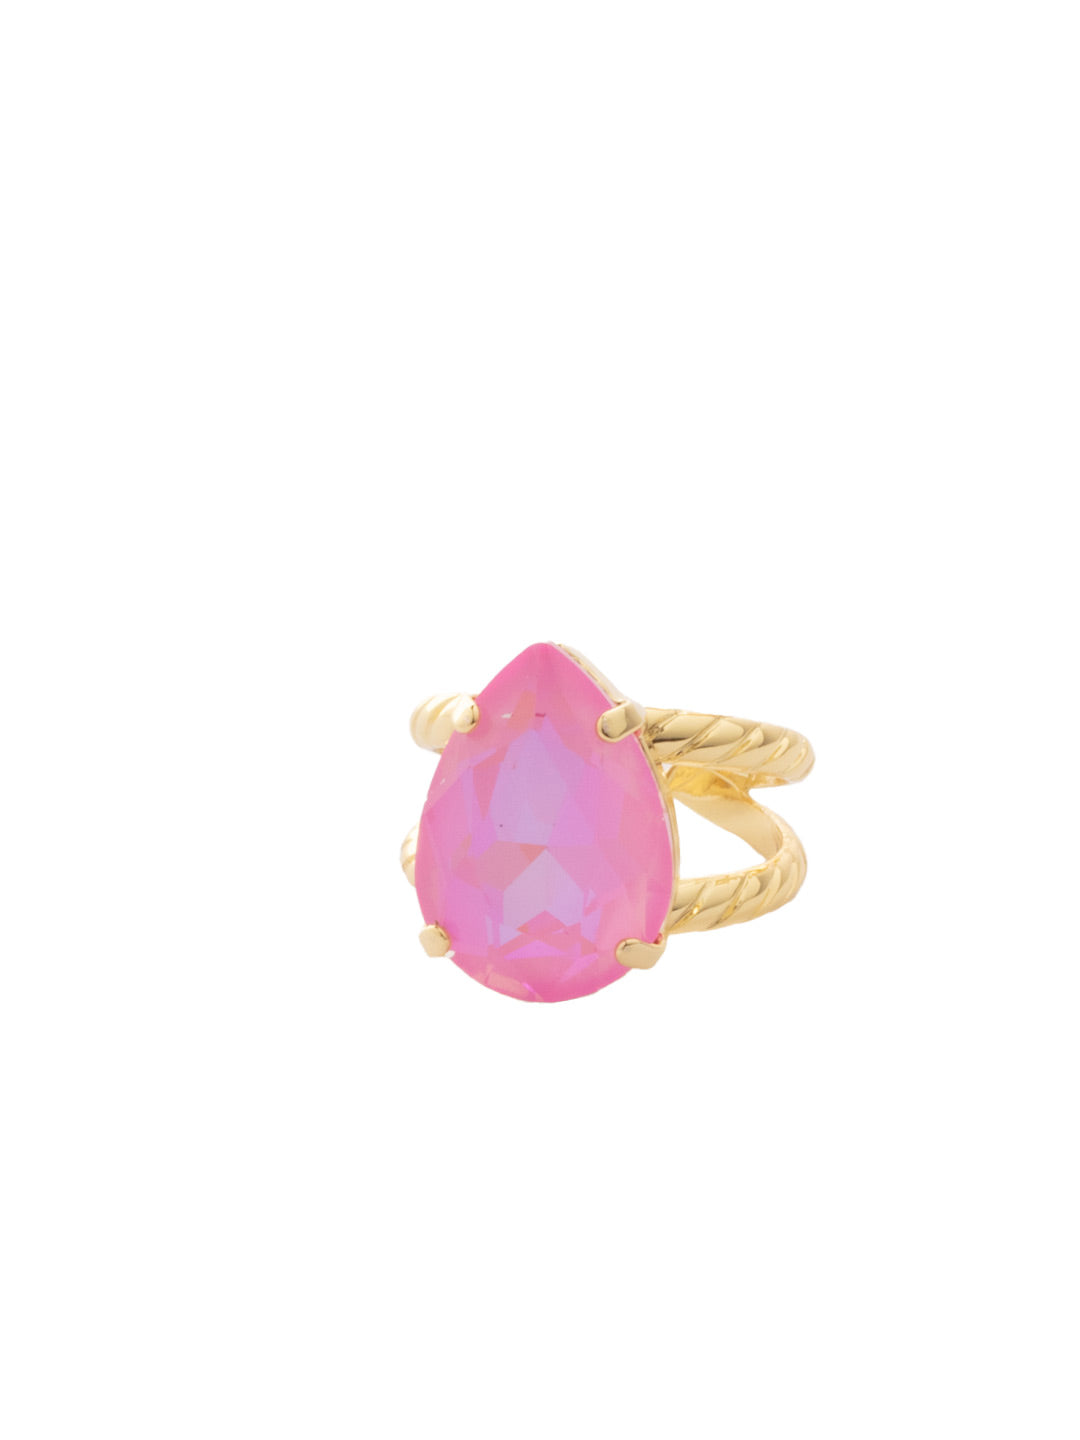 Eileen Statement Ring - RFF10BGLRD - <p>The Eileen Statement Ring features a single pear cut candy gem crystal on an adjustable open ring band. From Sorrelli's Light Rose Delite collection in our Bright Gold-tone finish.</p>